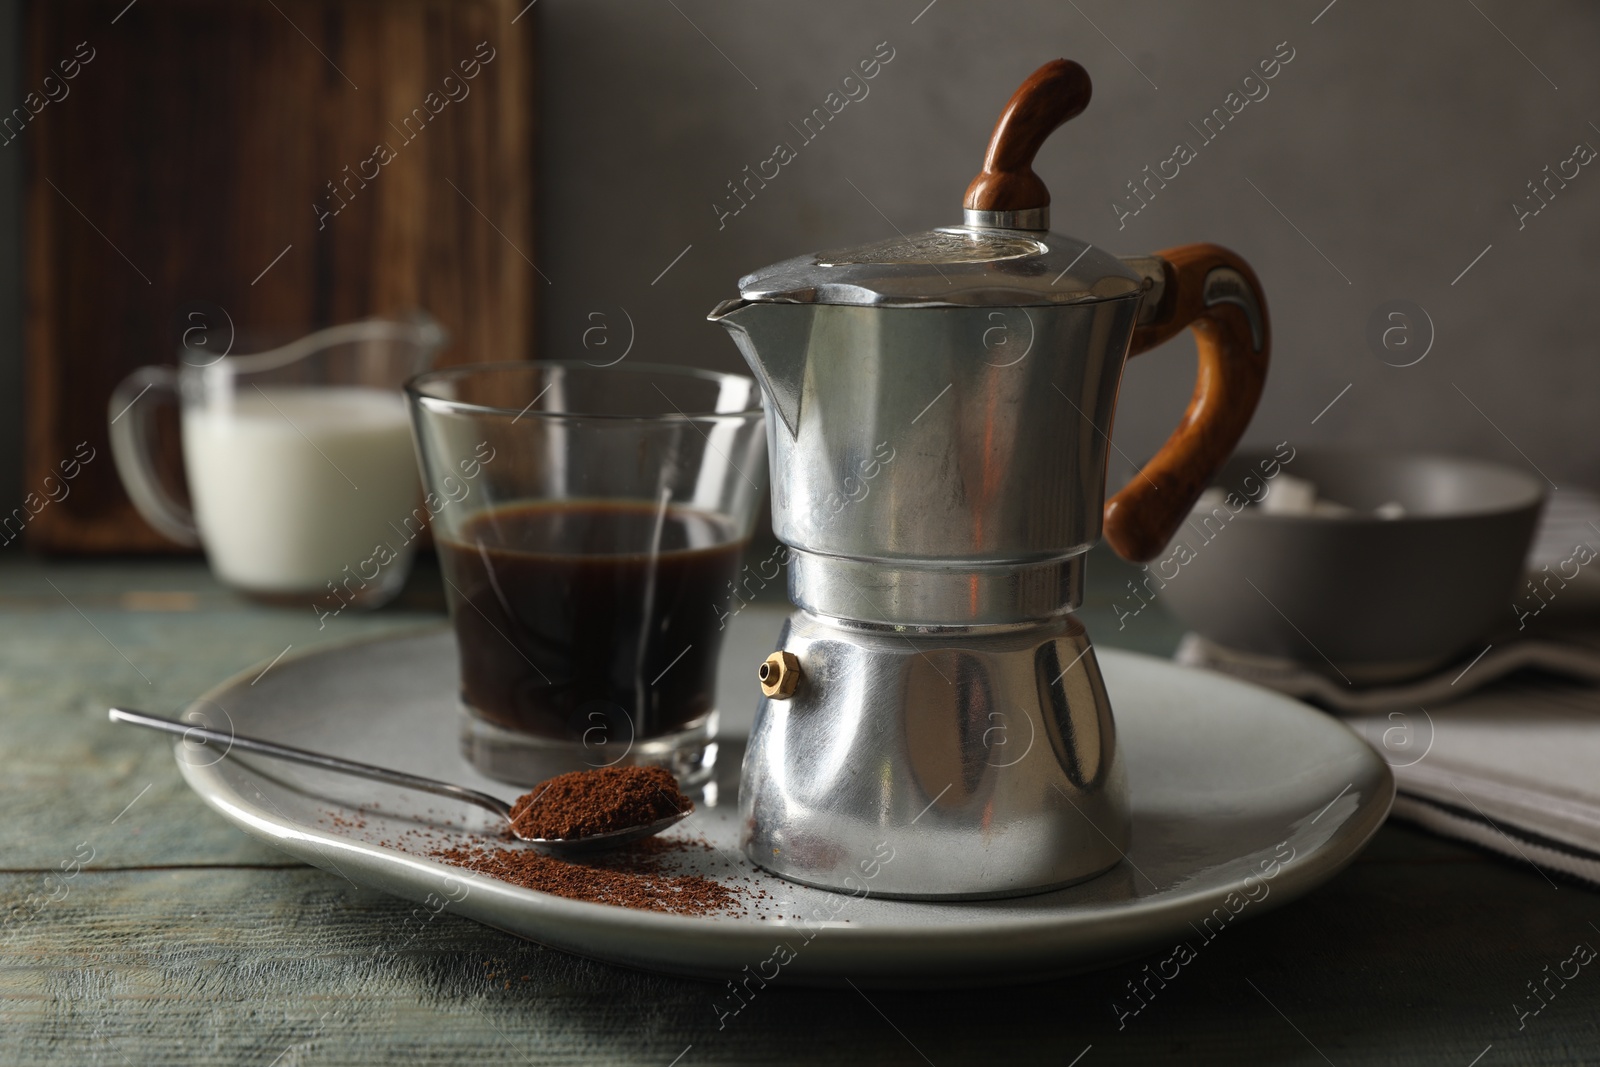 Photo of Brewed coffee in glass and moka pot on rustic wooden table